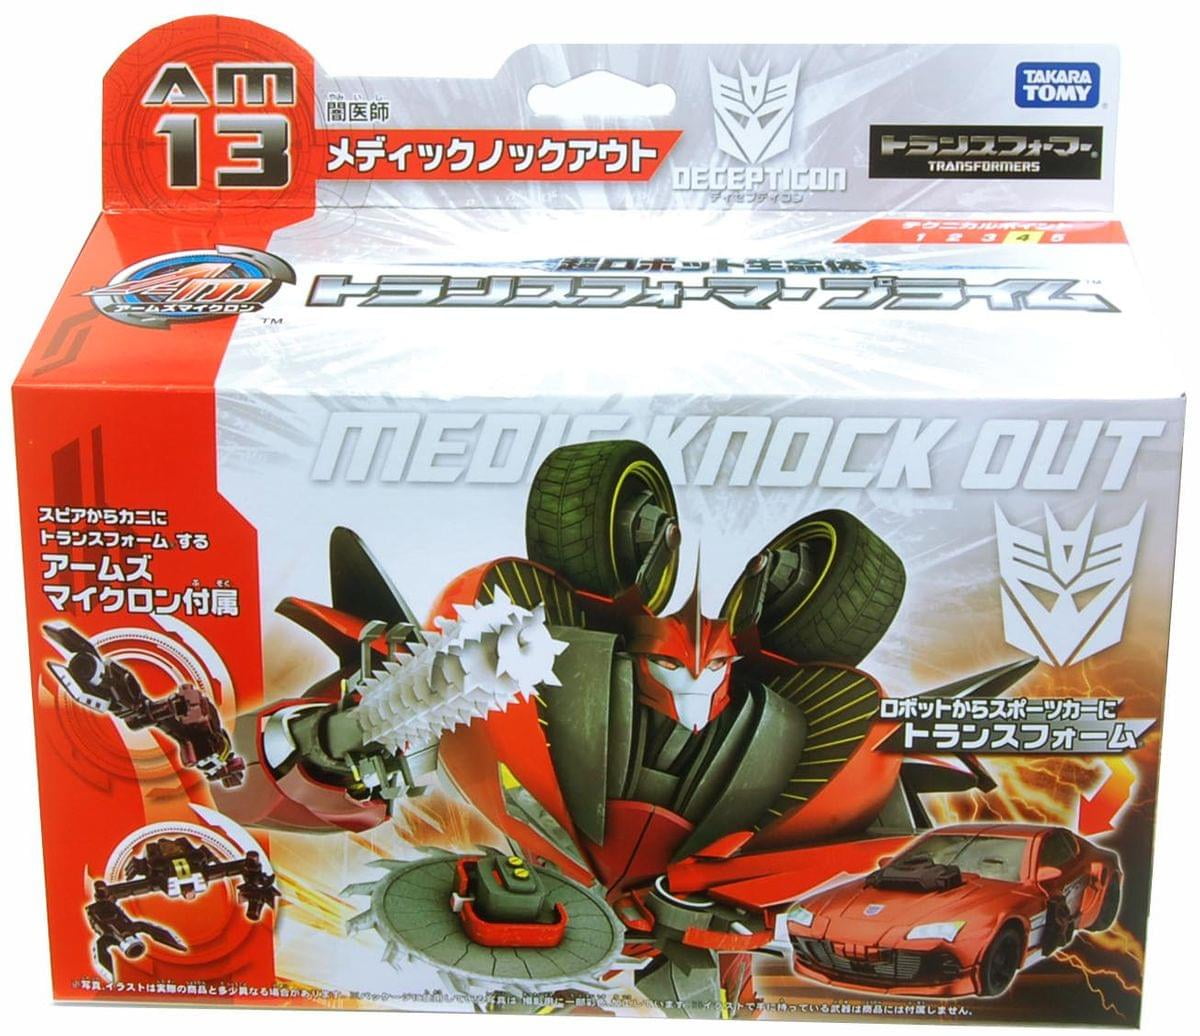 AM-13 Decepticon Knockout  Japanese Transformers Prime Arms Micron